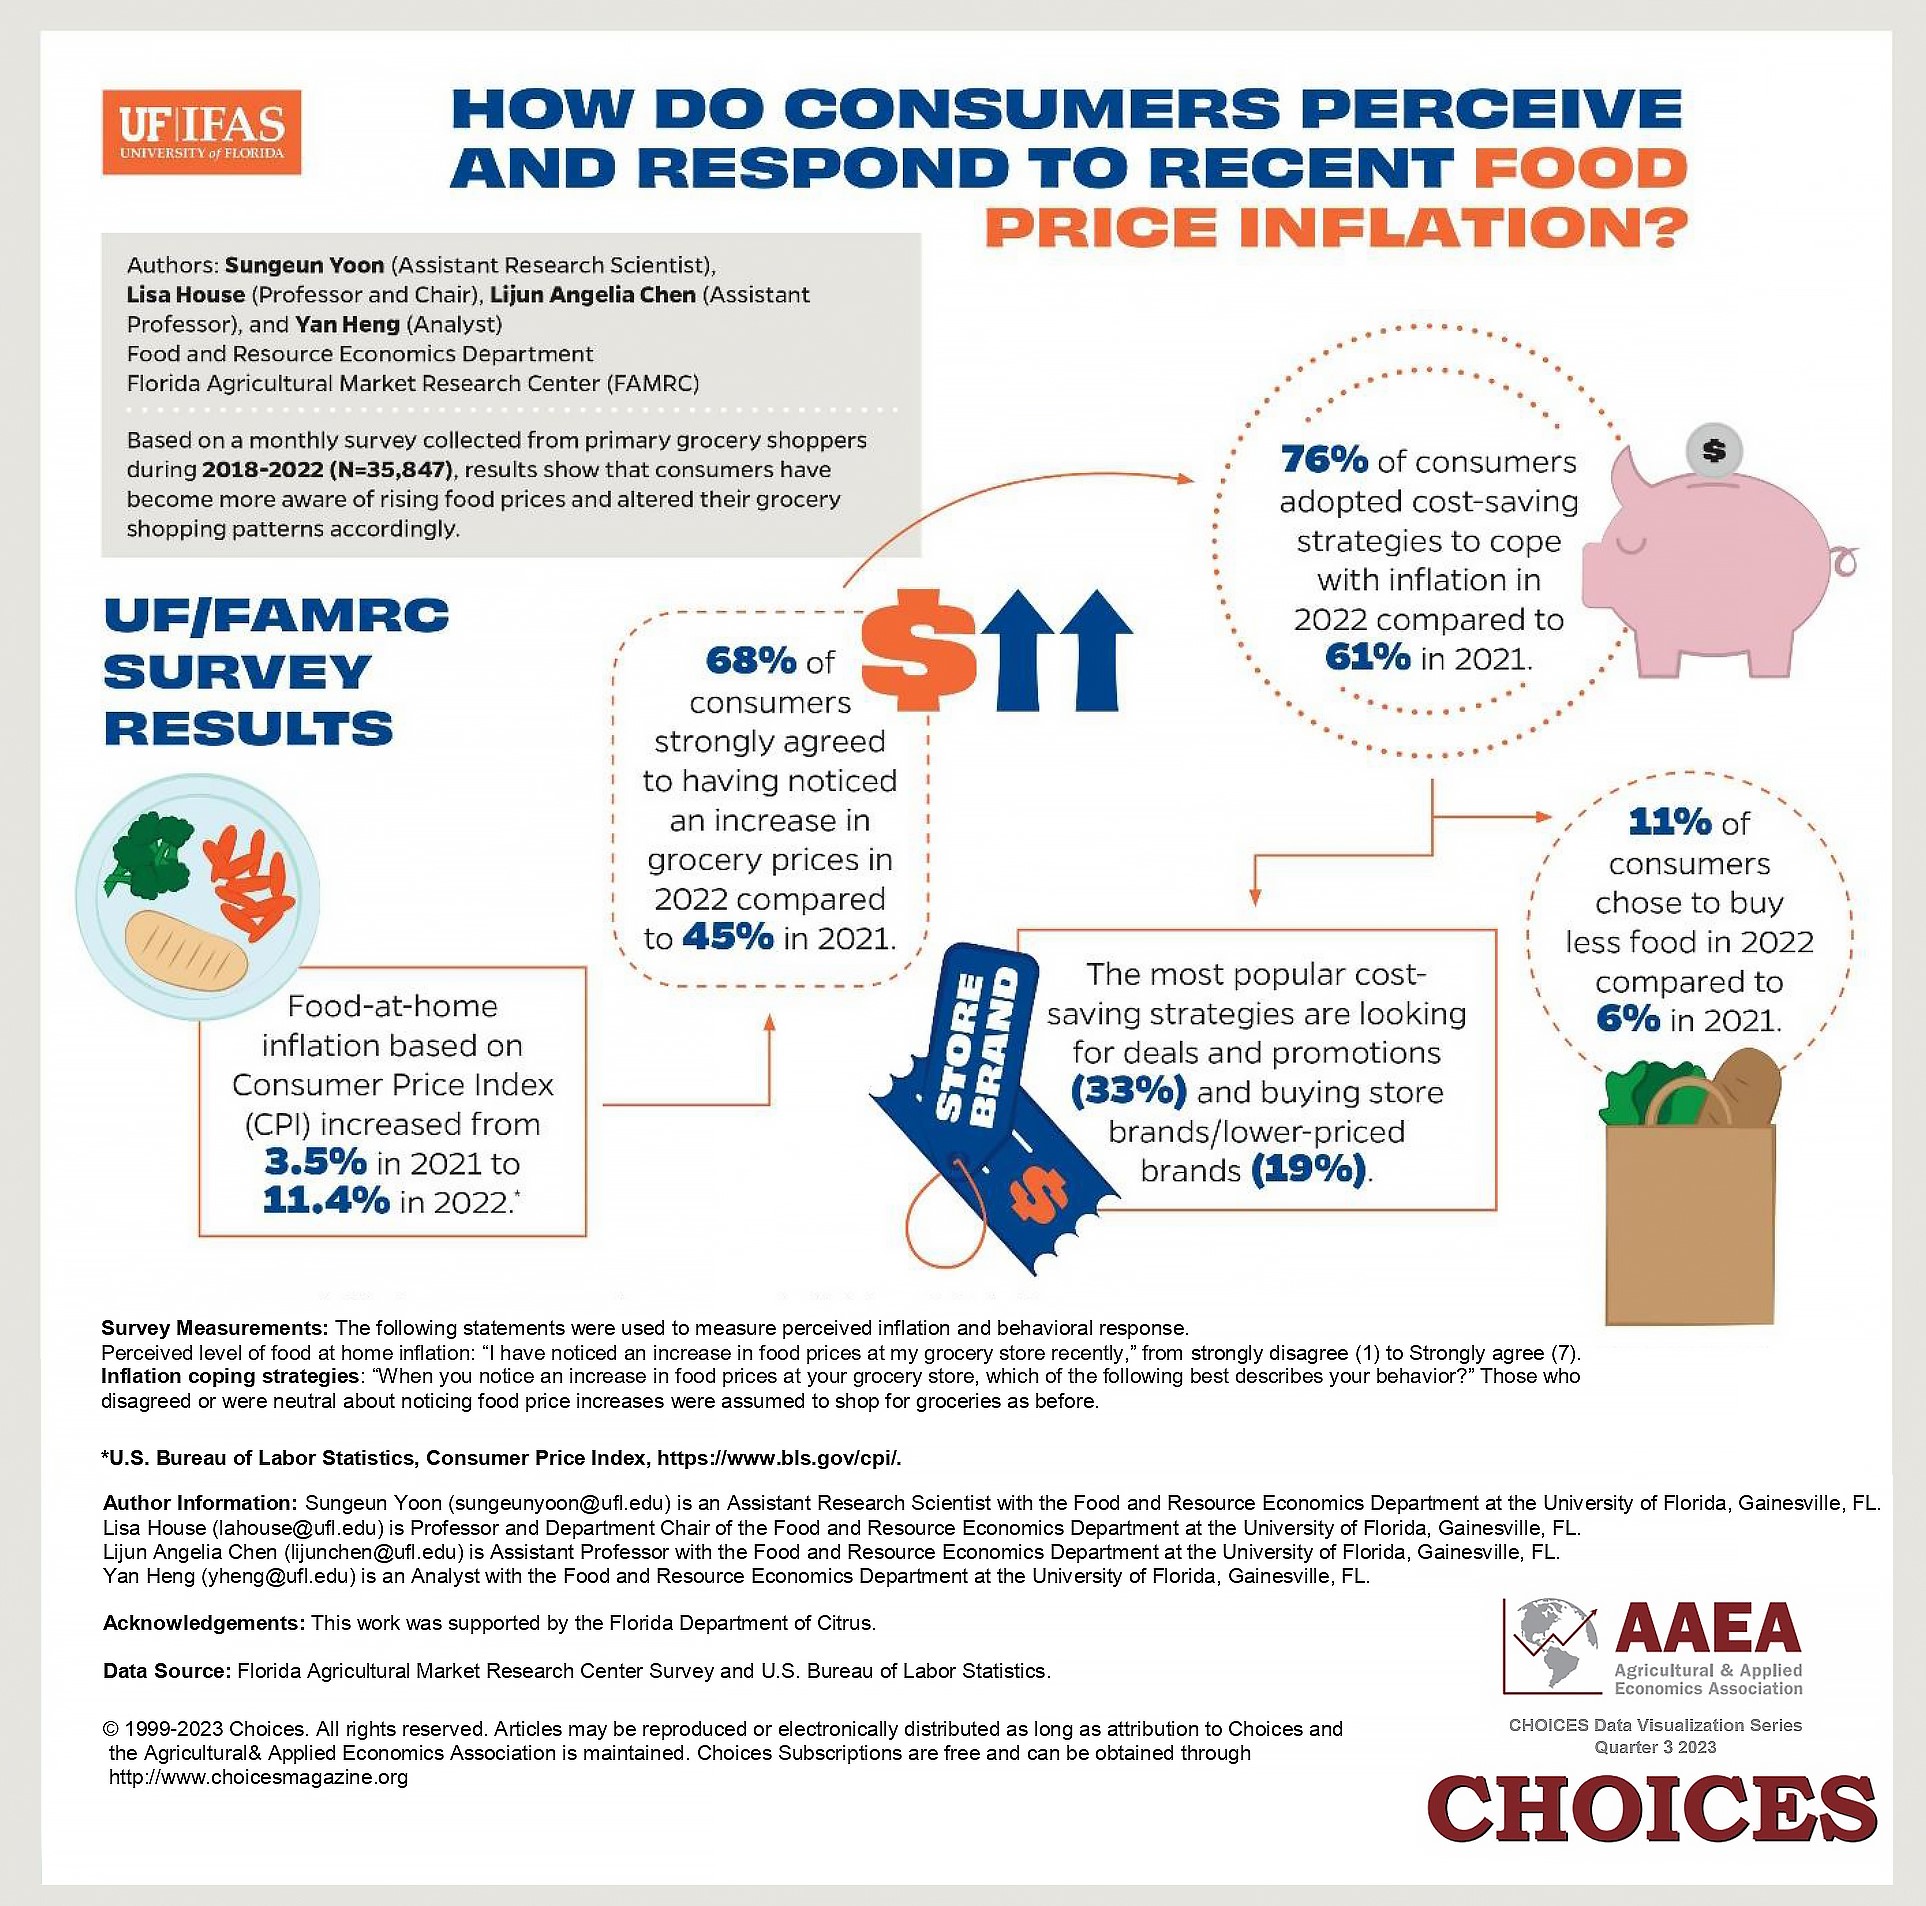 How Do Consumers Perceive and Respond to Recent Food Price Inflation?